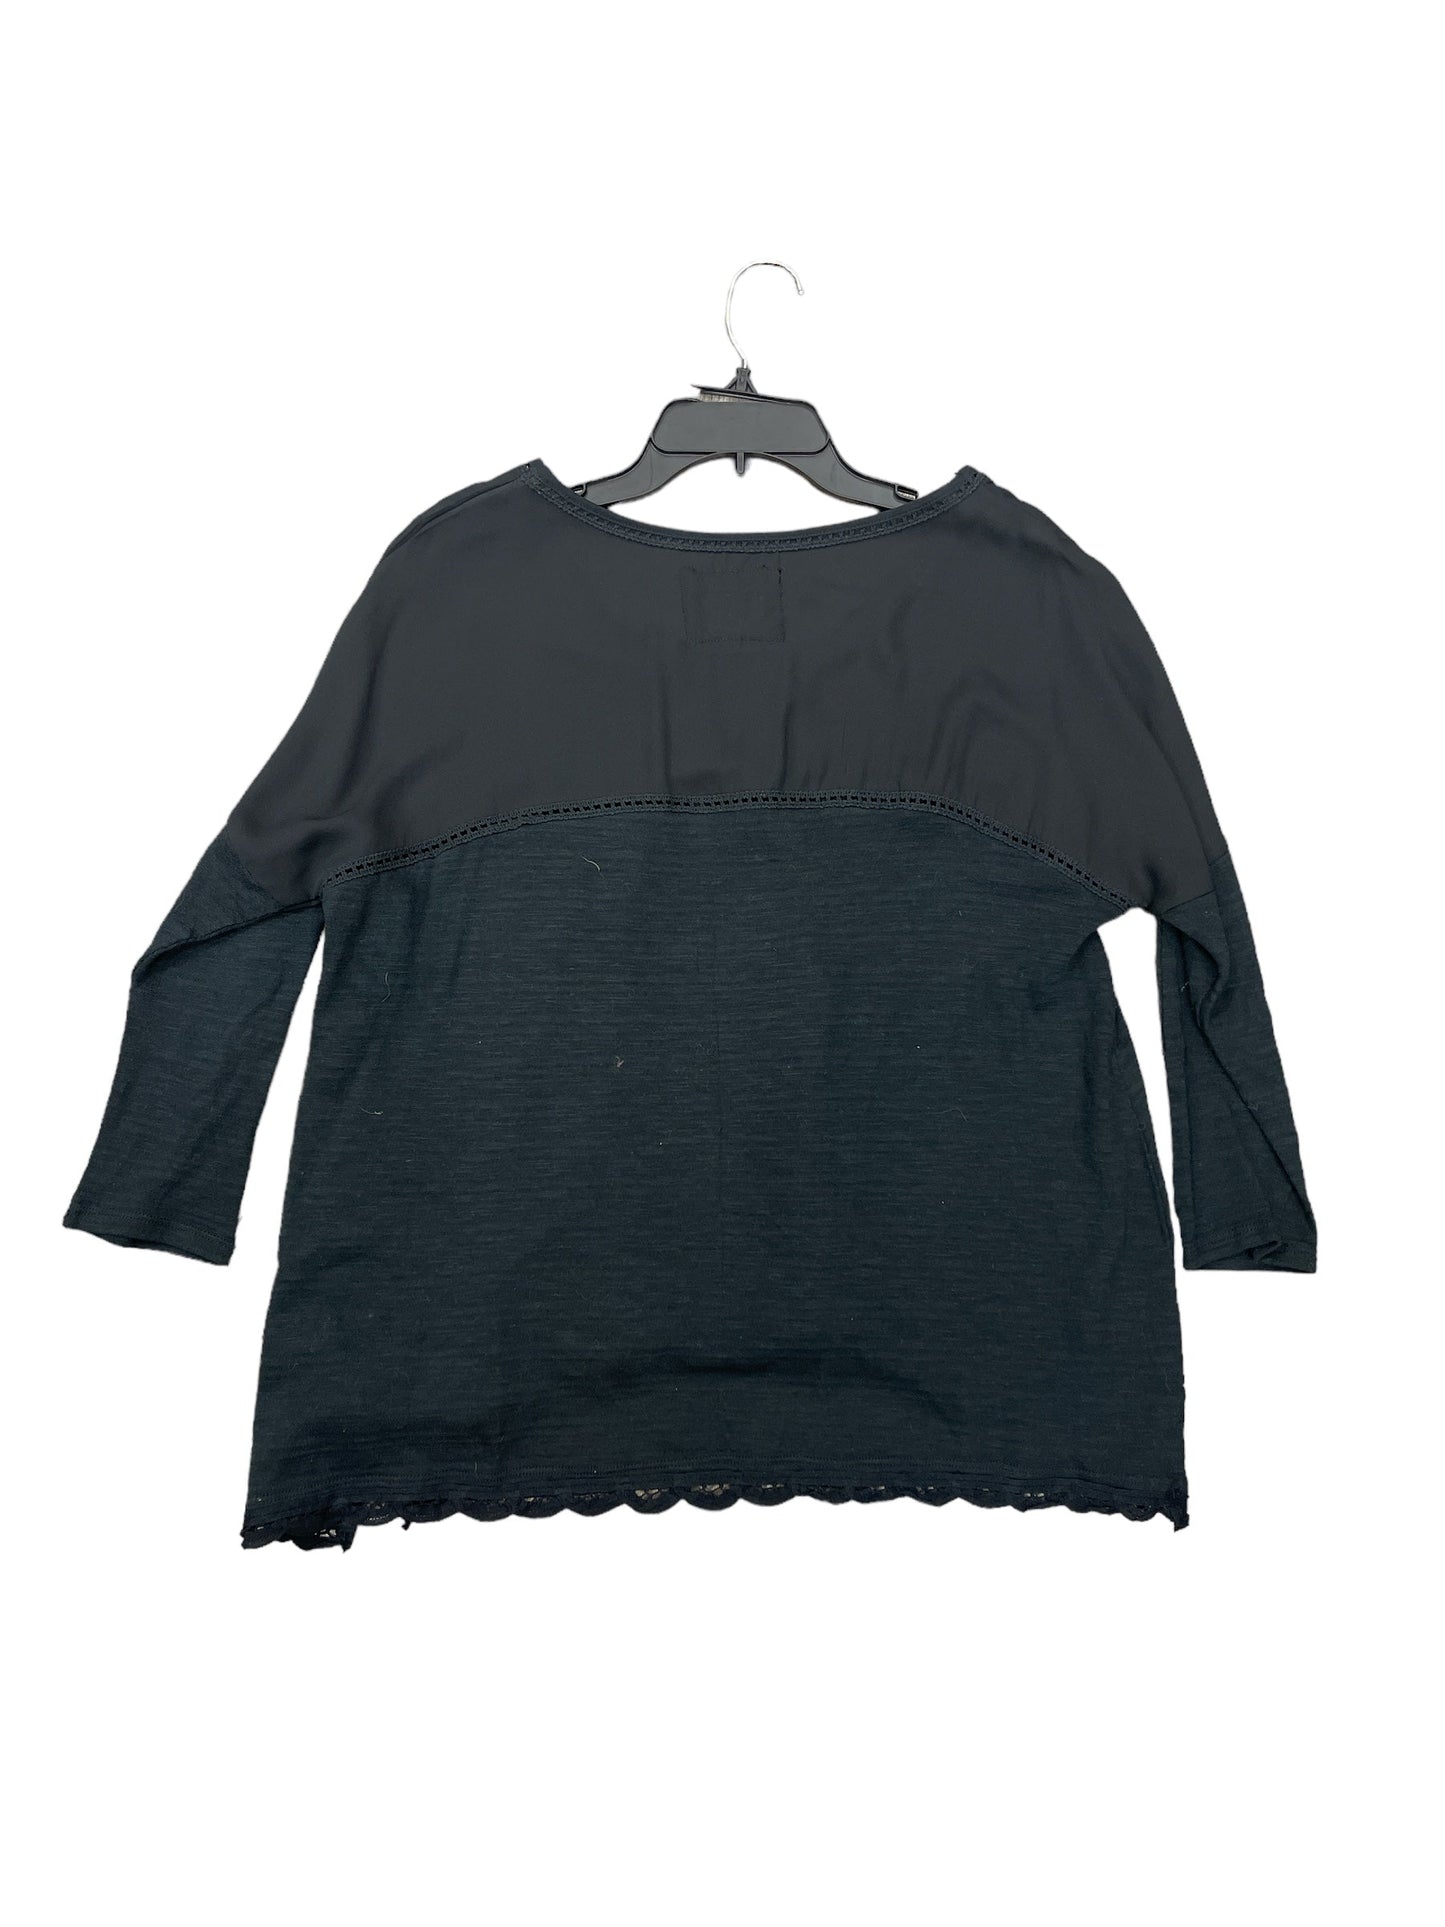 Top Long Sleeve By Meadow Rue  Size: M